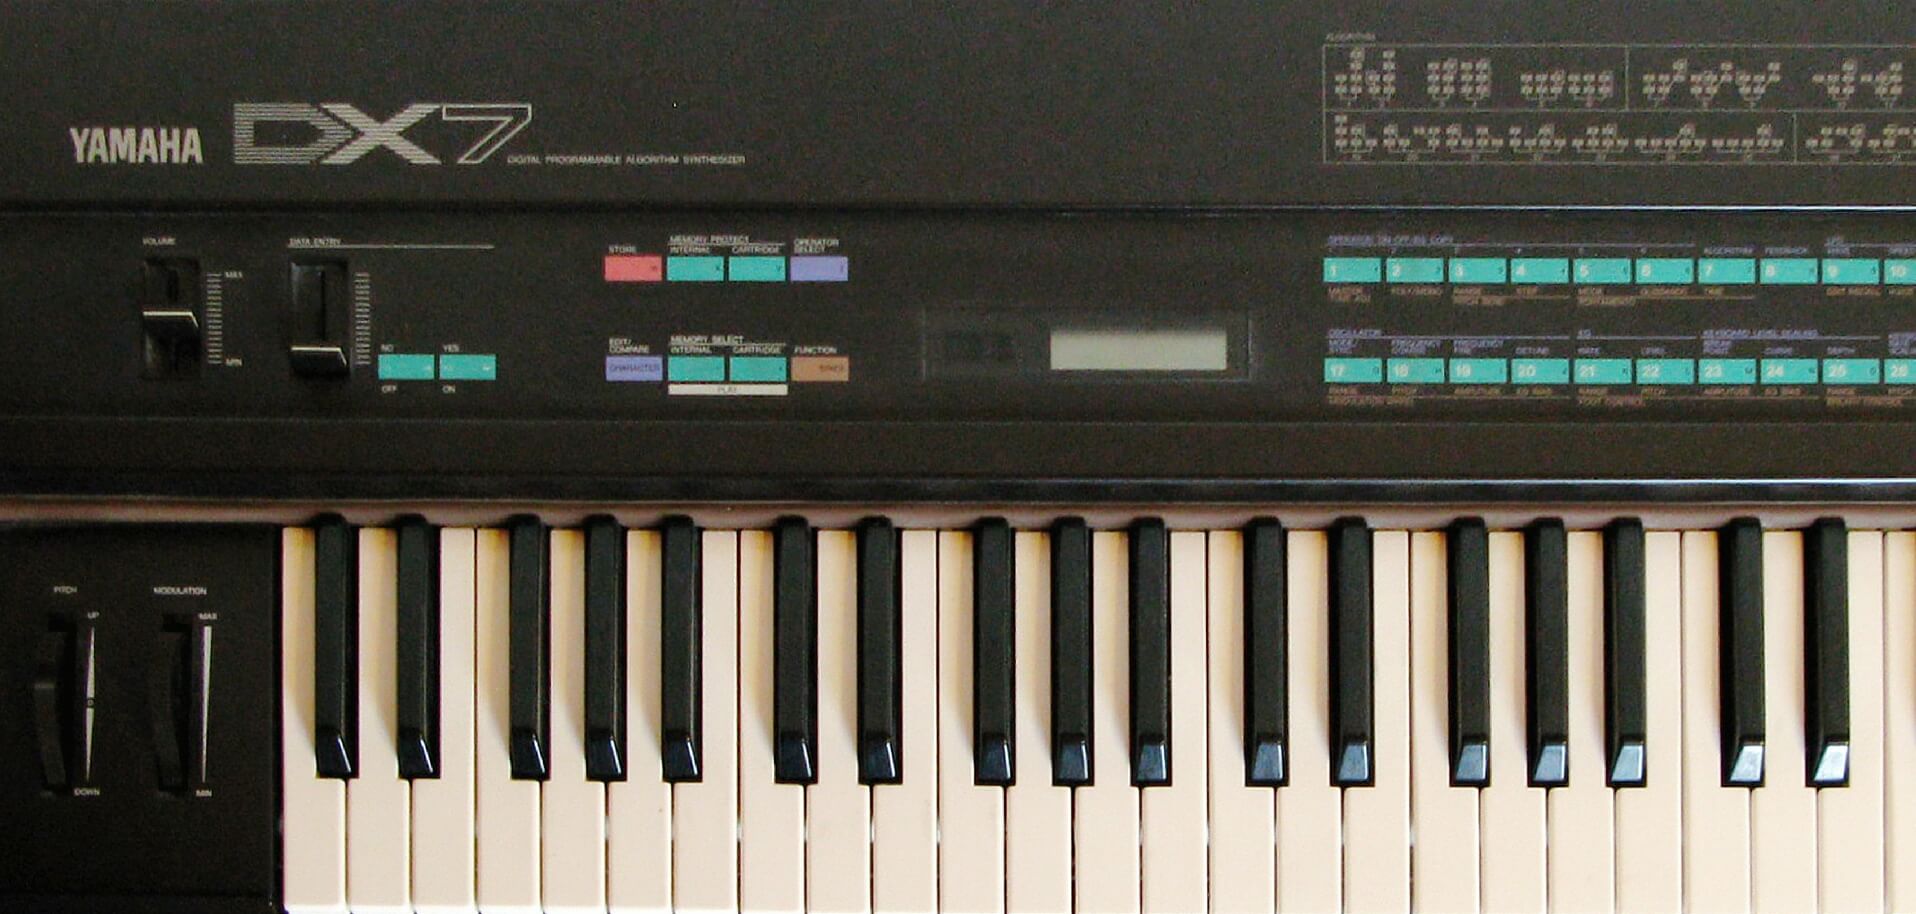 Yamaha DX-7 - An important synthesizer from the 1980s